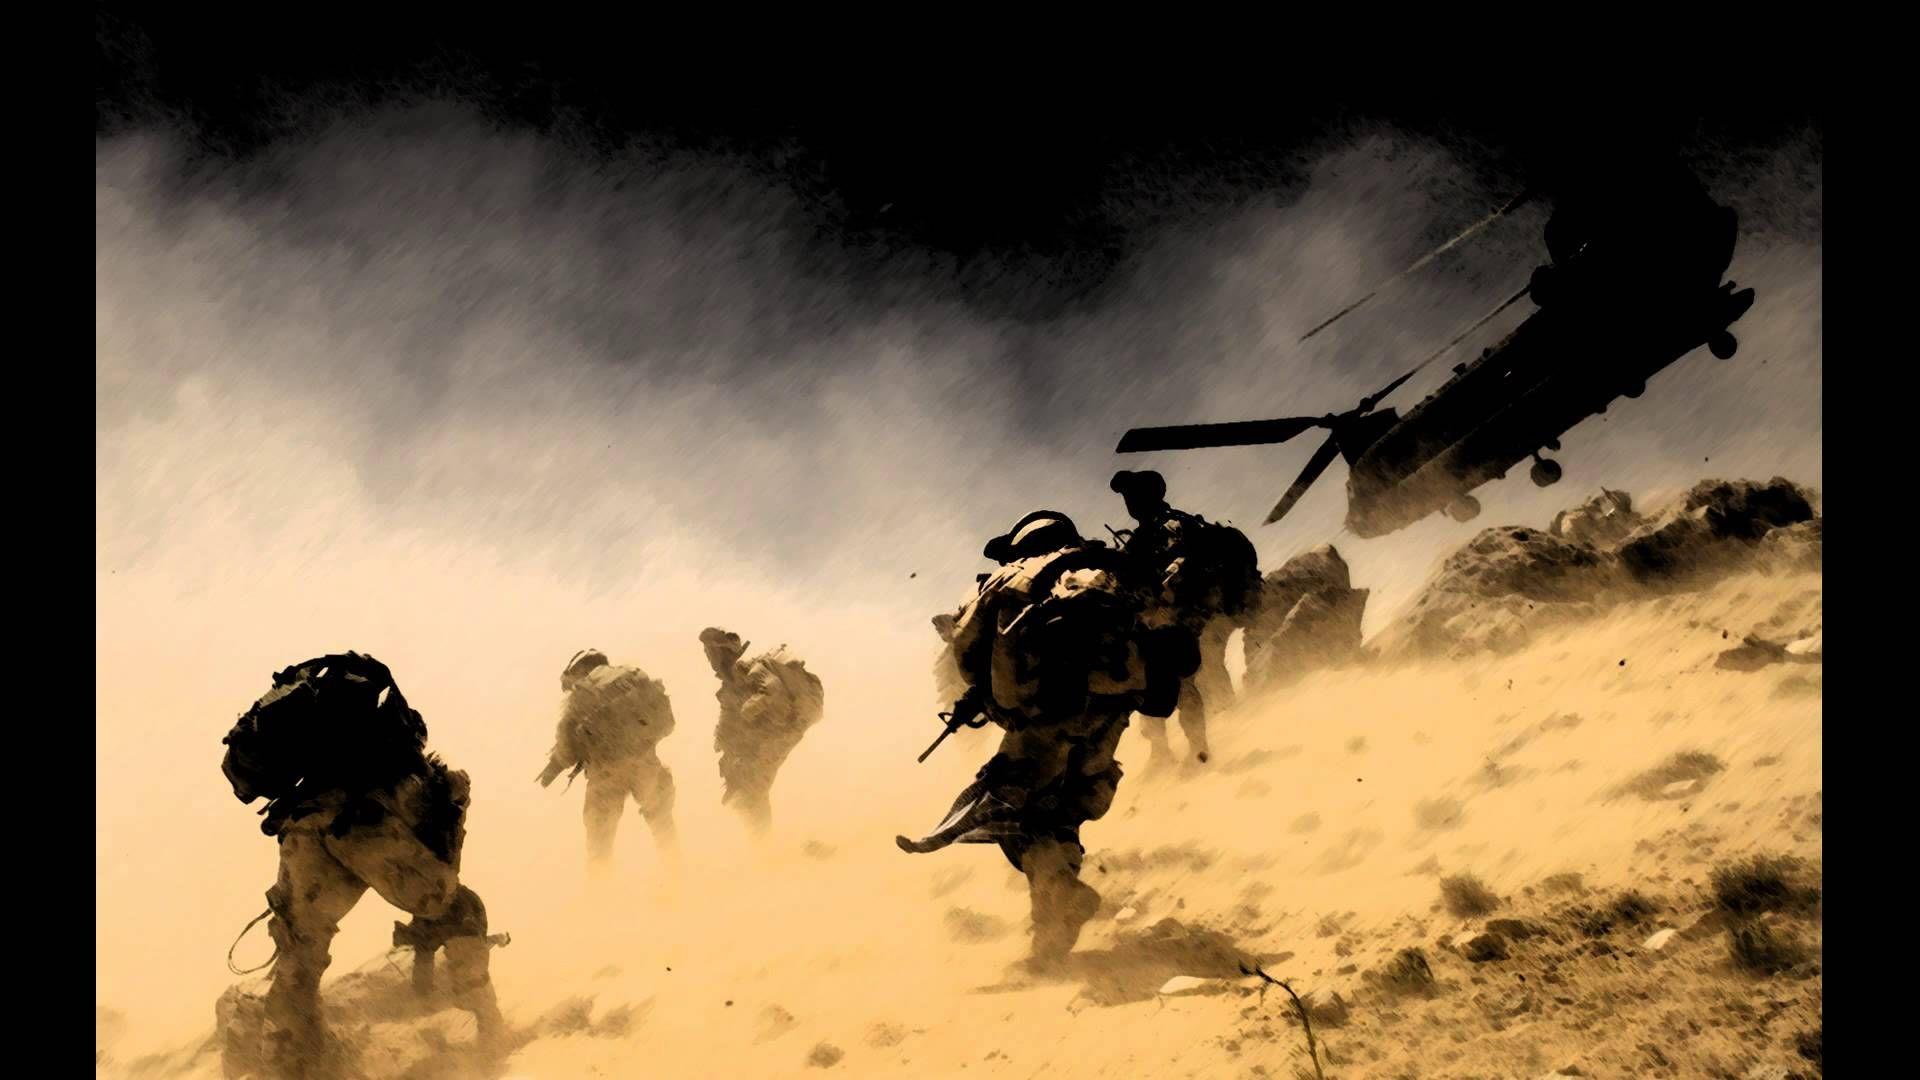 Epic Military Wallpapers - Top Free Epic Military Backgrounds ...